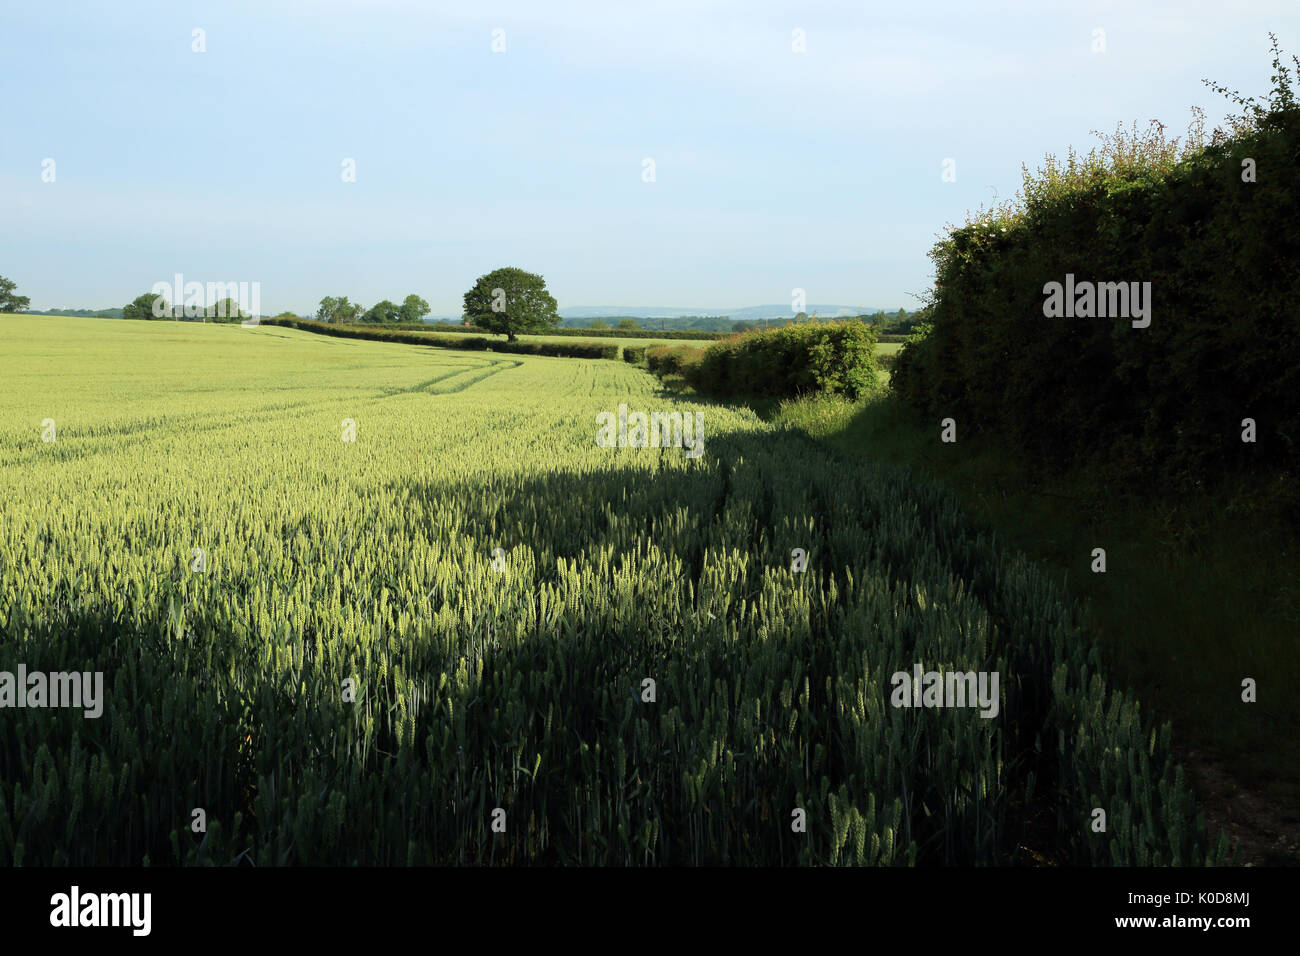 Wheat field known as 'hospital field' from Canterbury Road, Brabourne Lees, Ashford, Kent, England, United Kingdom Stock Photo